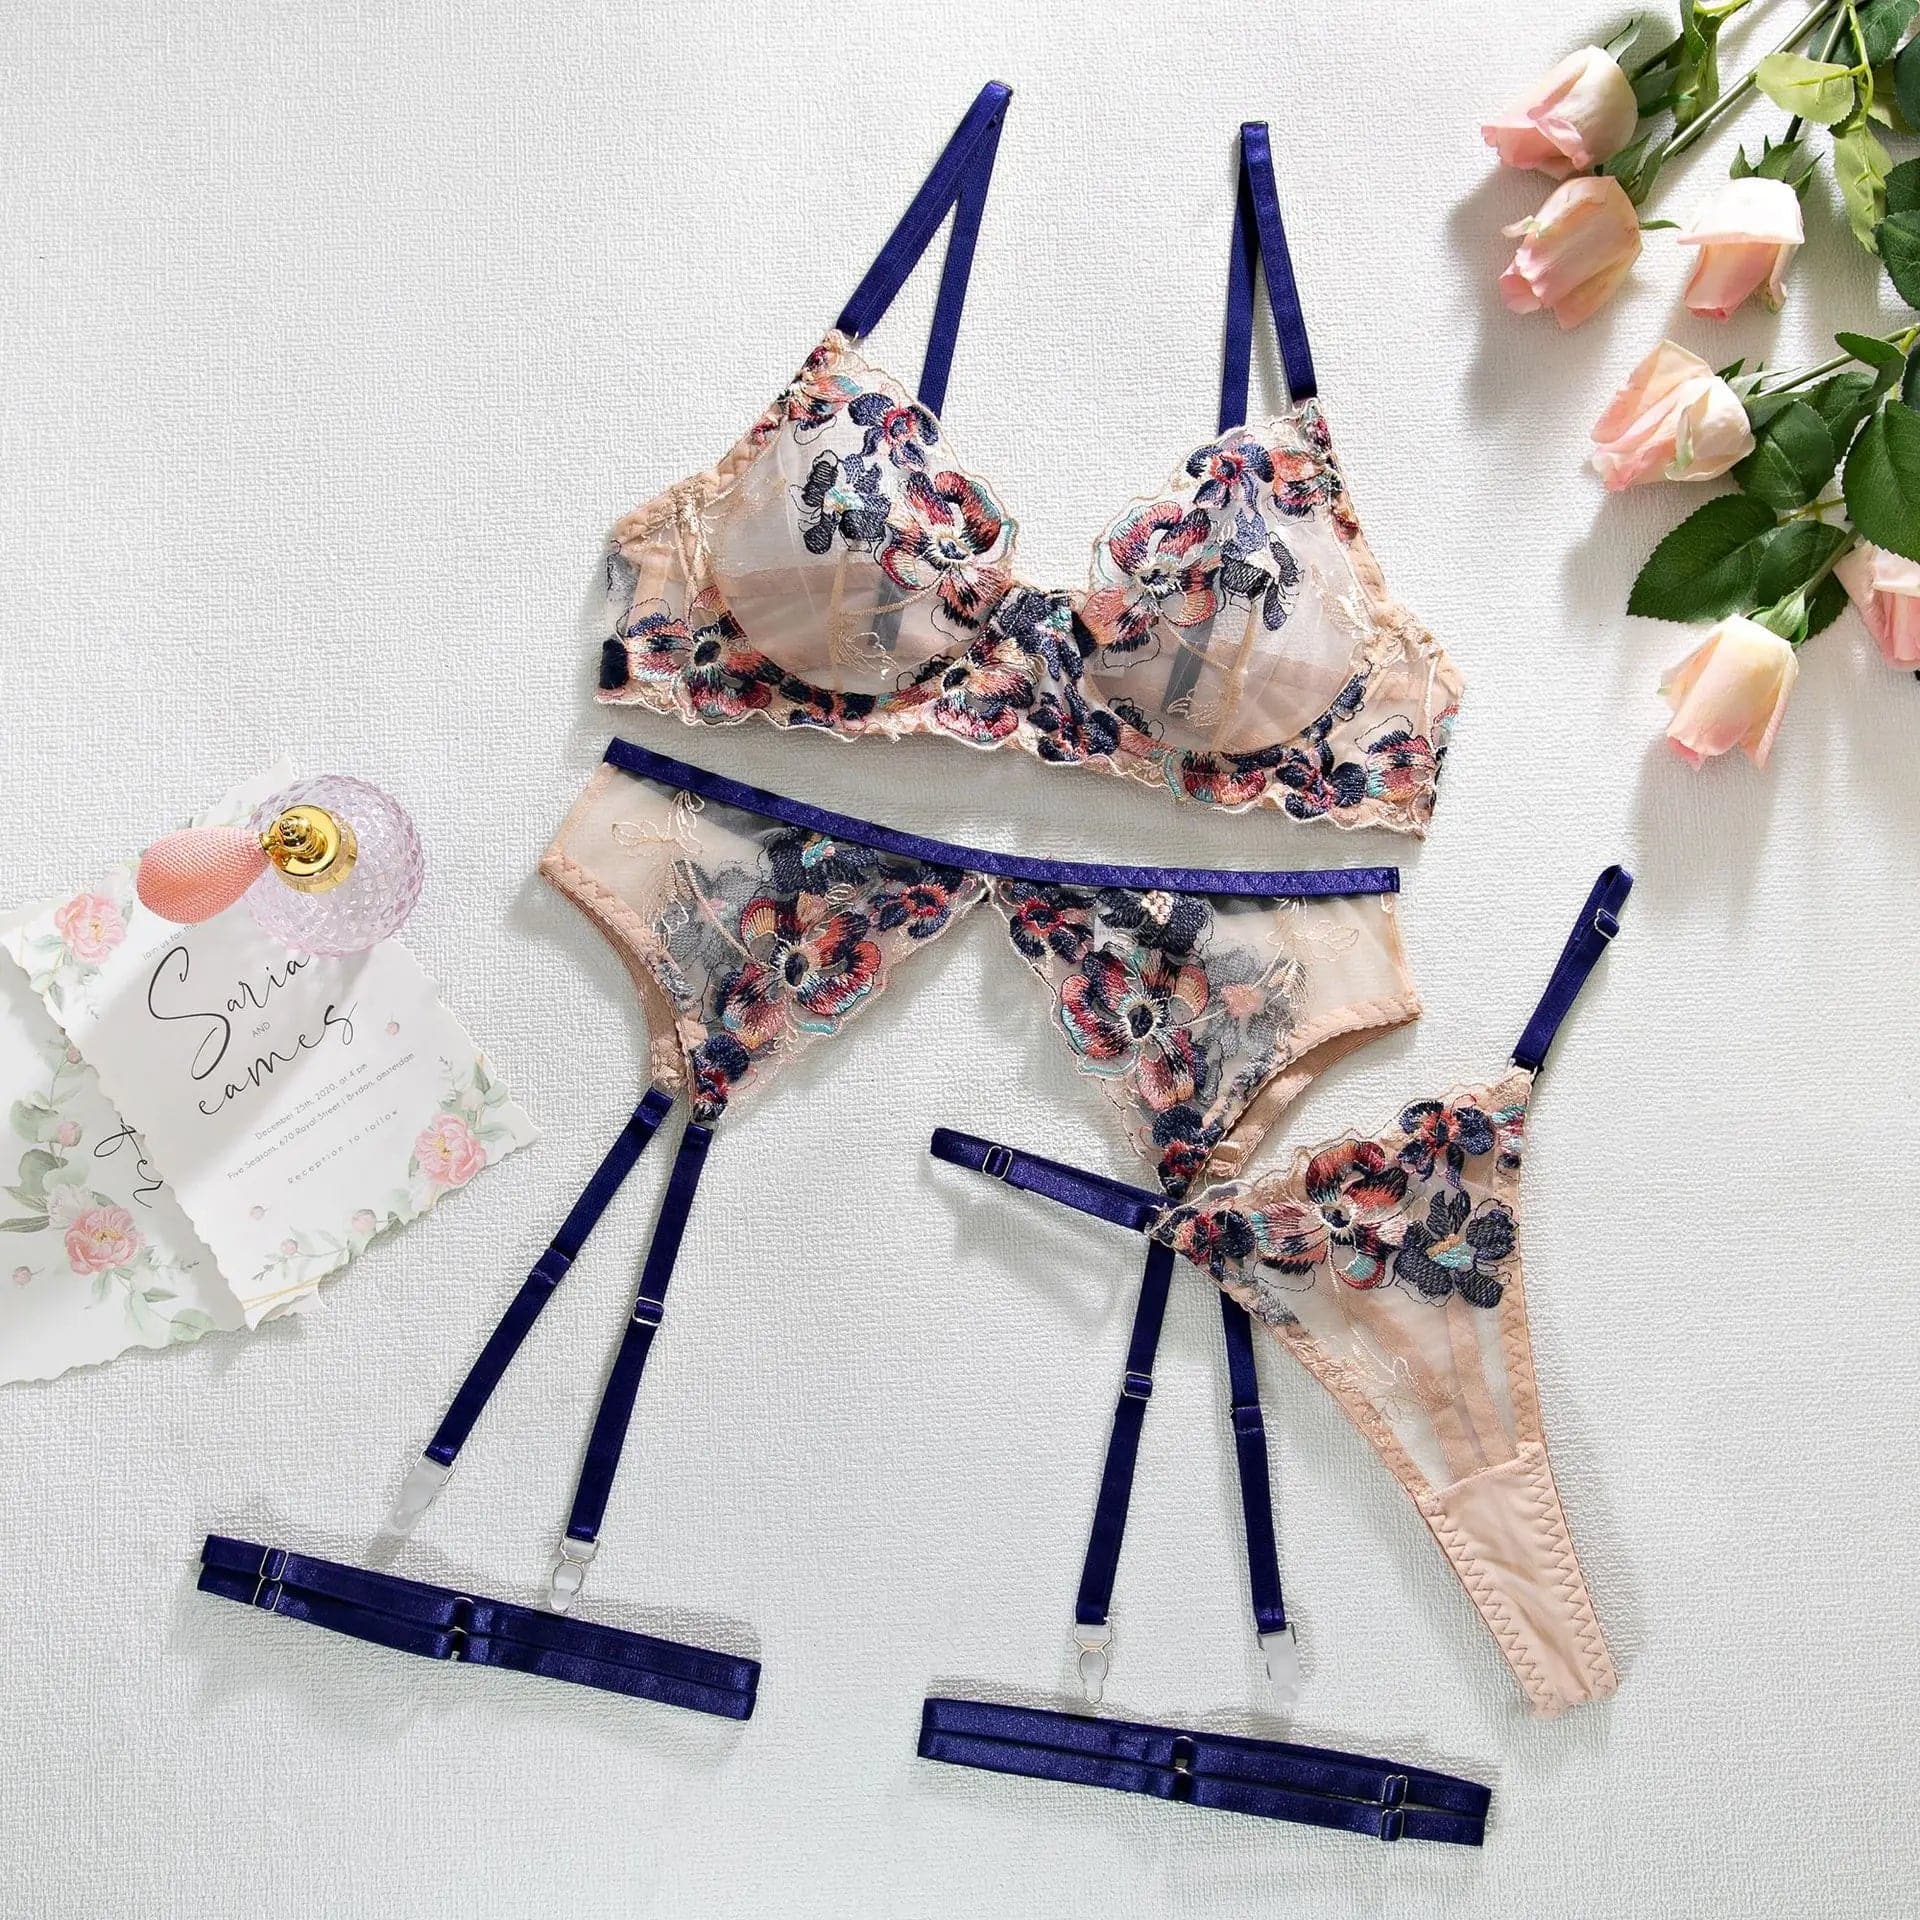 Transparent Lace Bra Set with Panty and Garter - Sexy Floral Lingerie - Wandering Woman